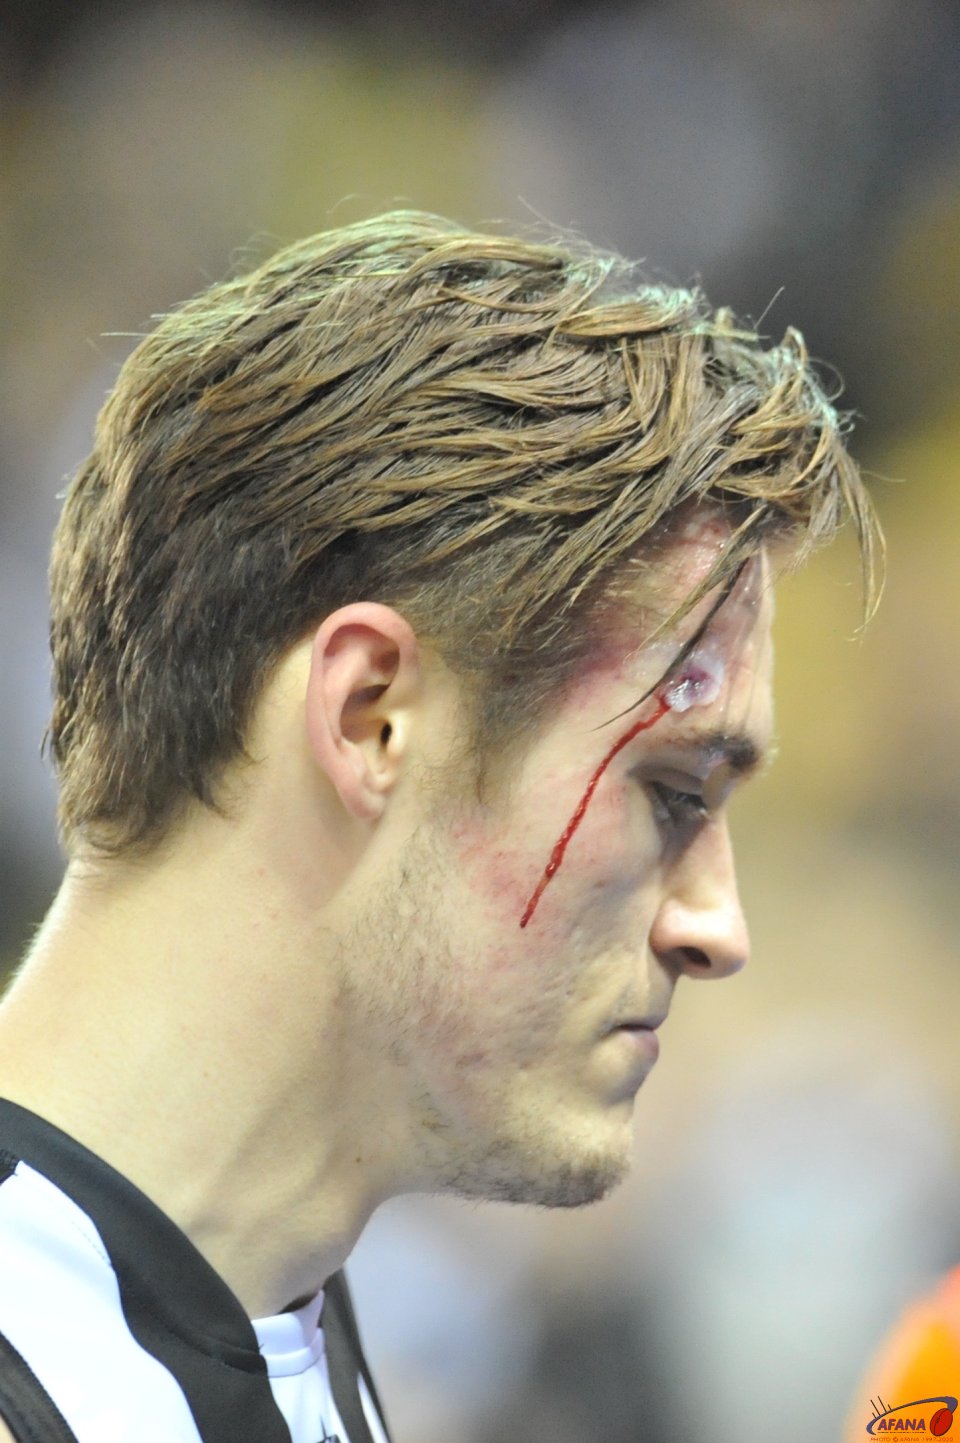 The spoils of battle, Moore heads to the rooms at half time face bleeding